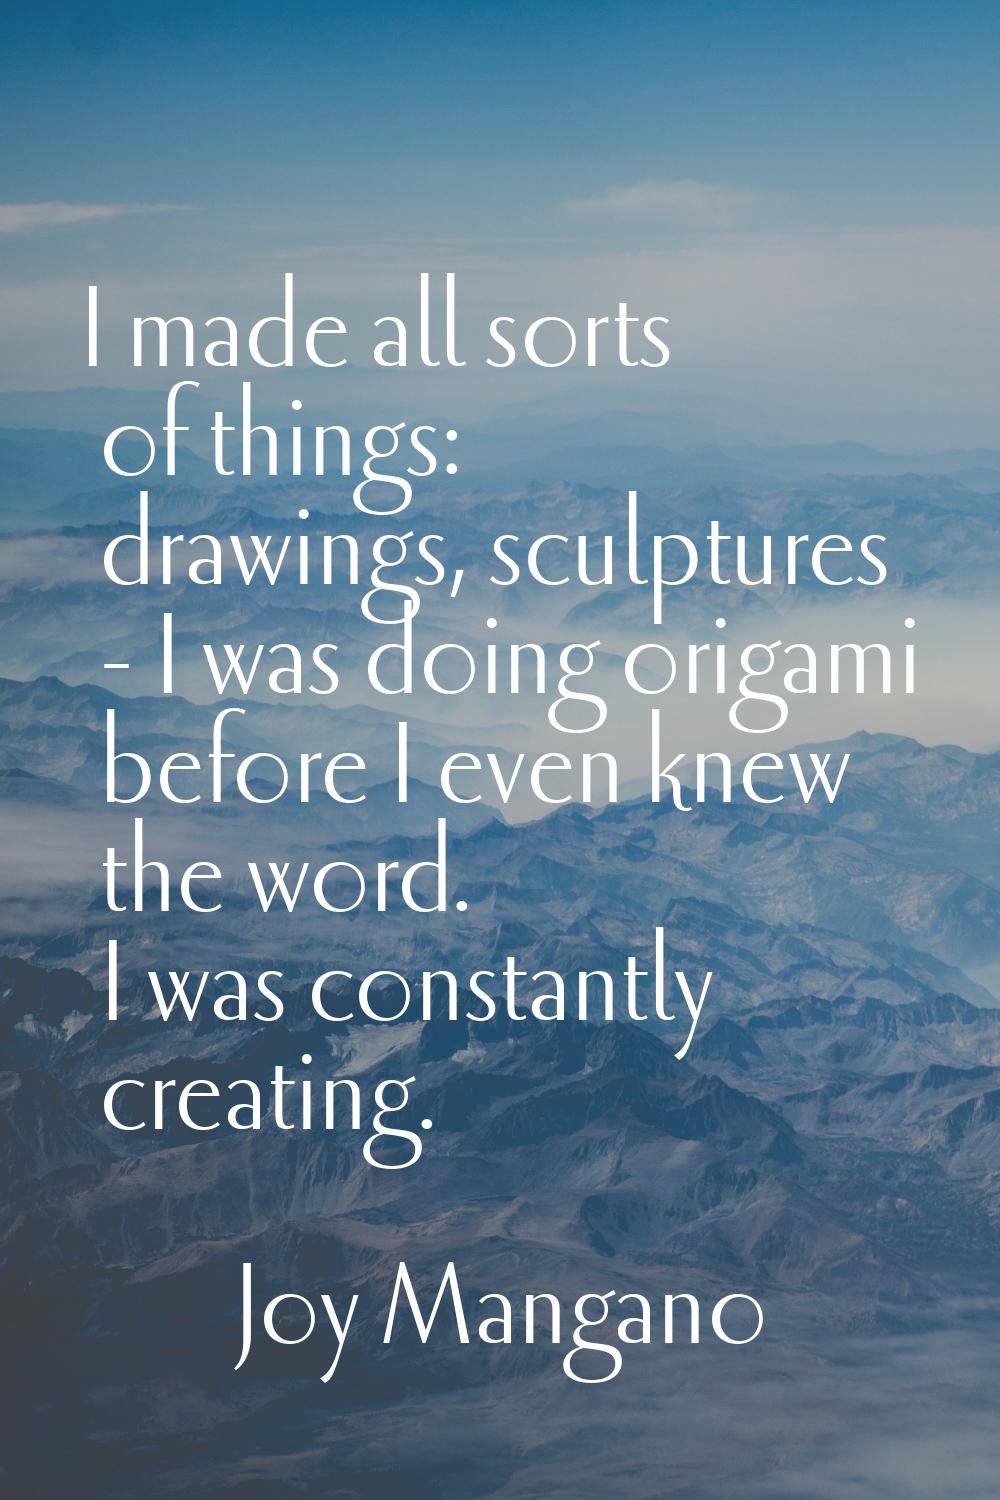 I made all sorts of things: drawings, sculptures - I was doing origami before I even knew the word.